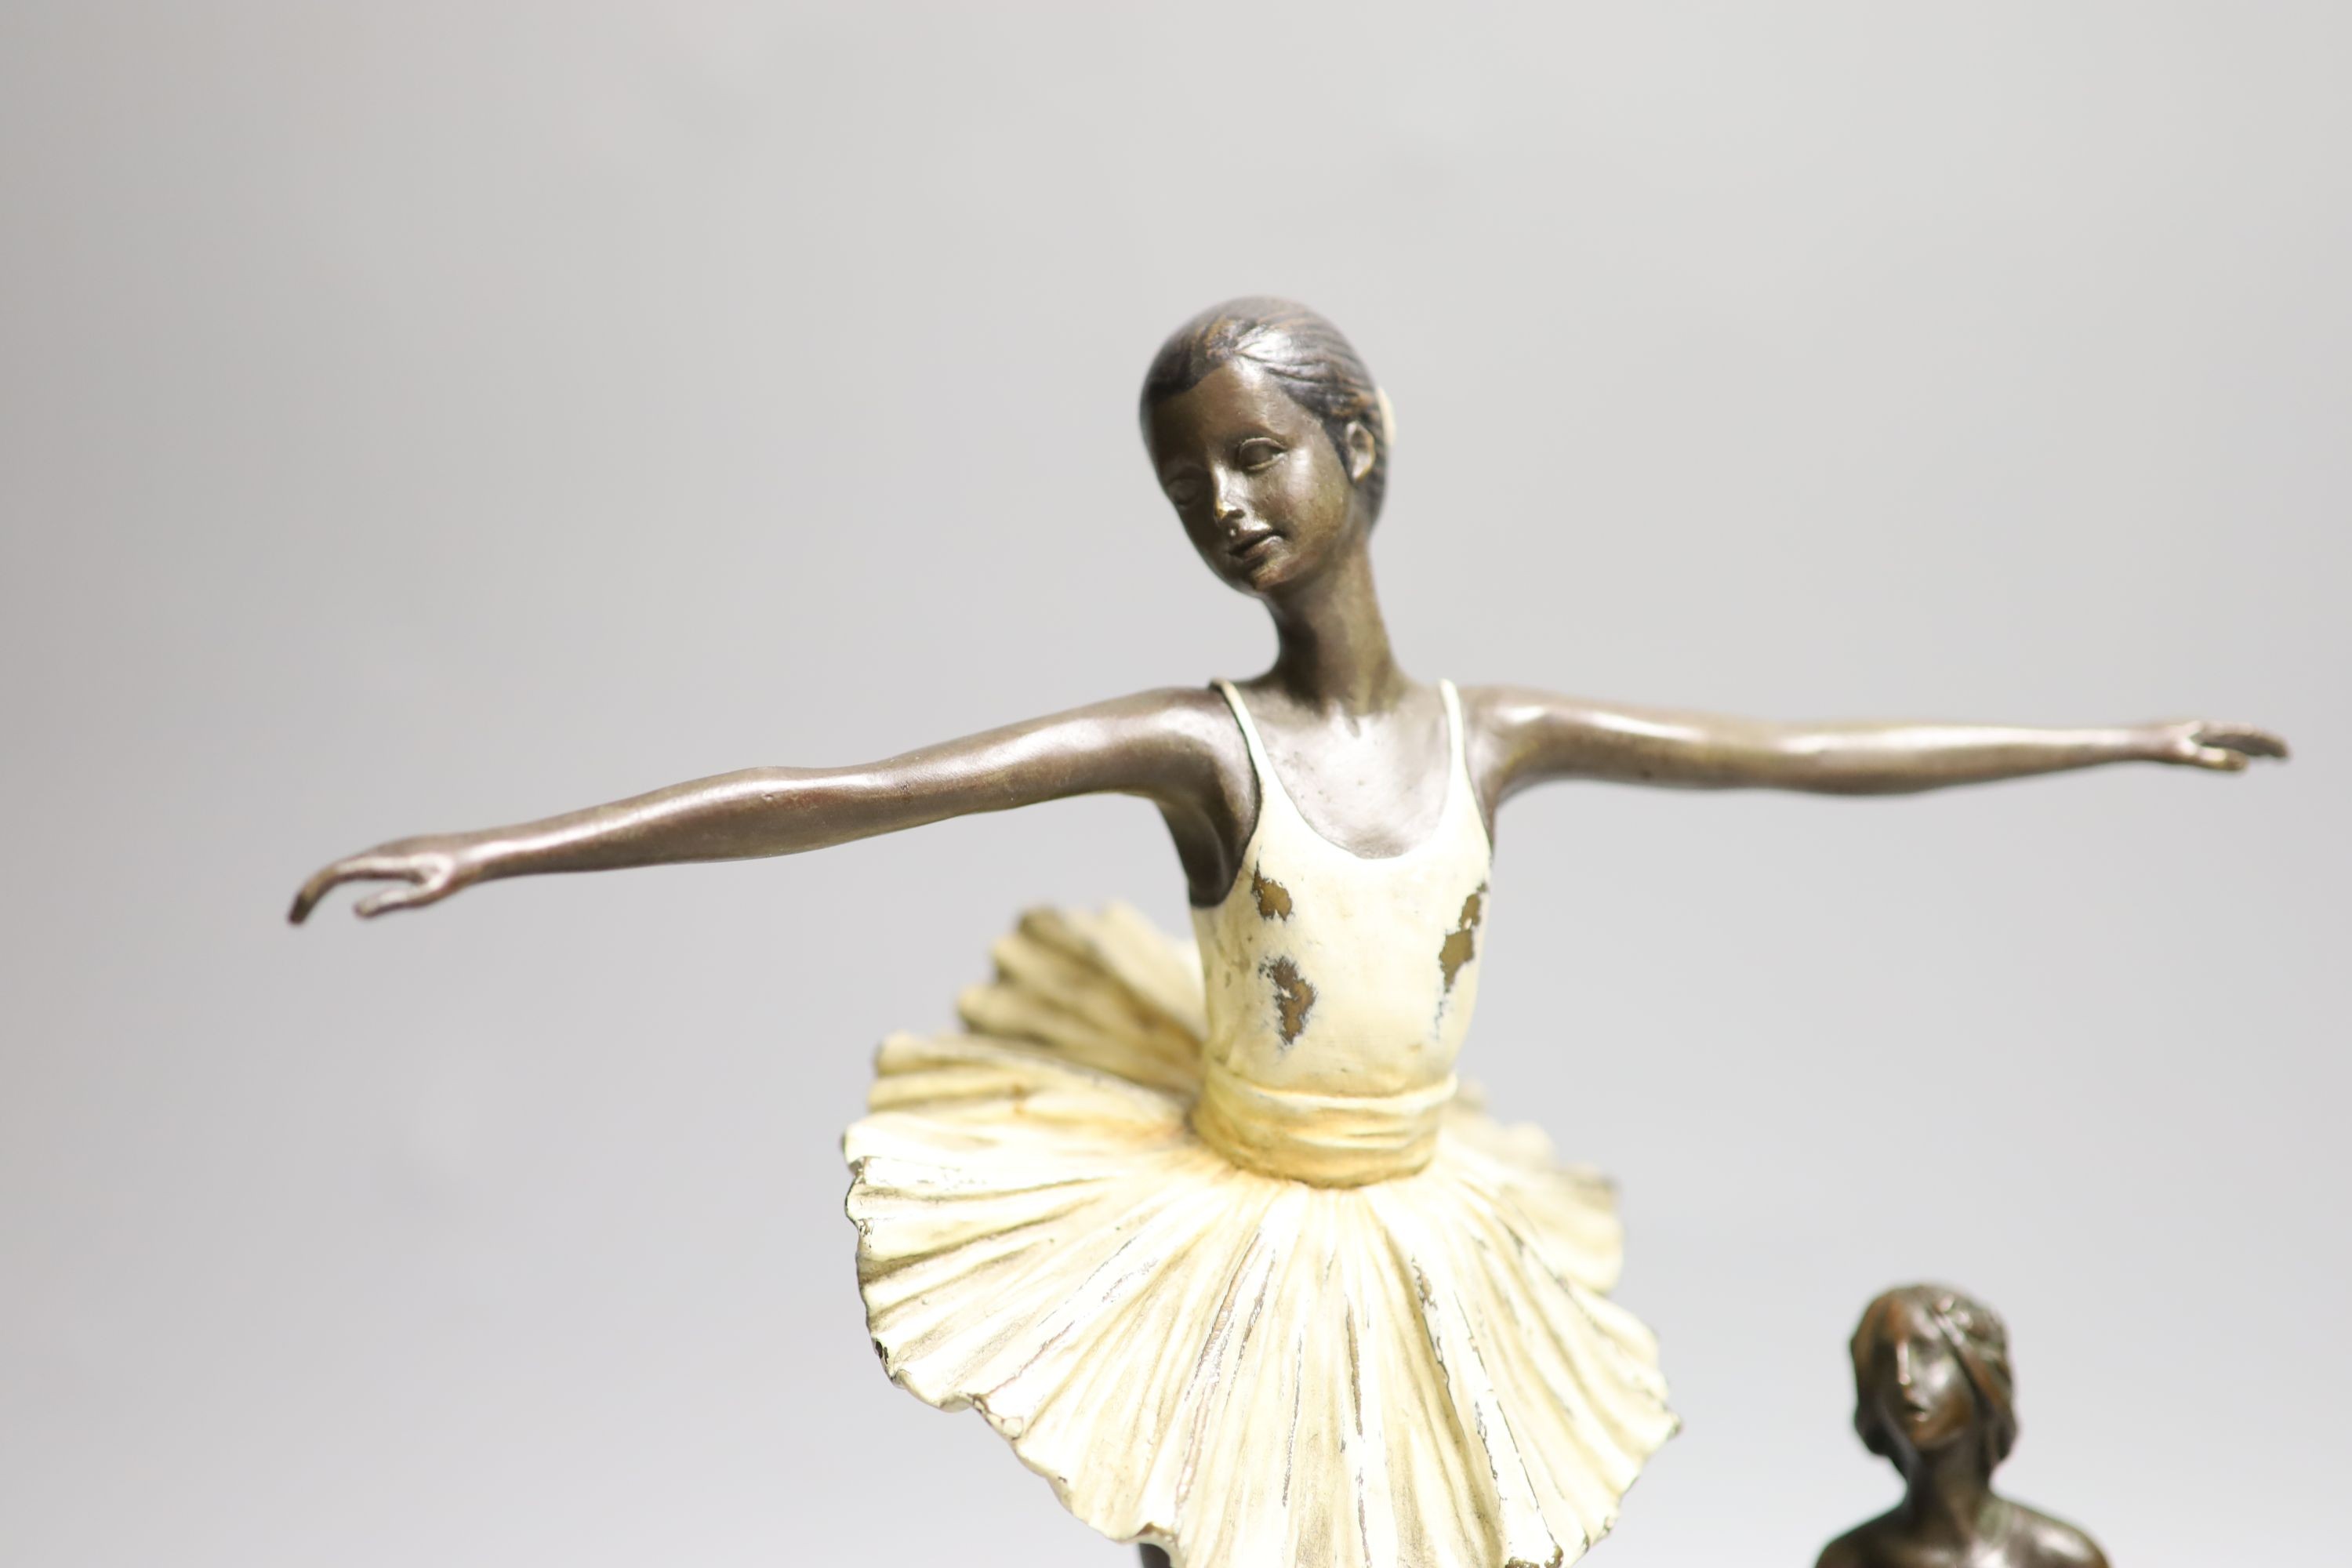 Two bronze figures of a ballerina and a nude maiden